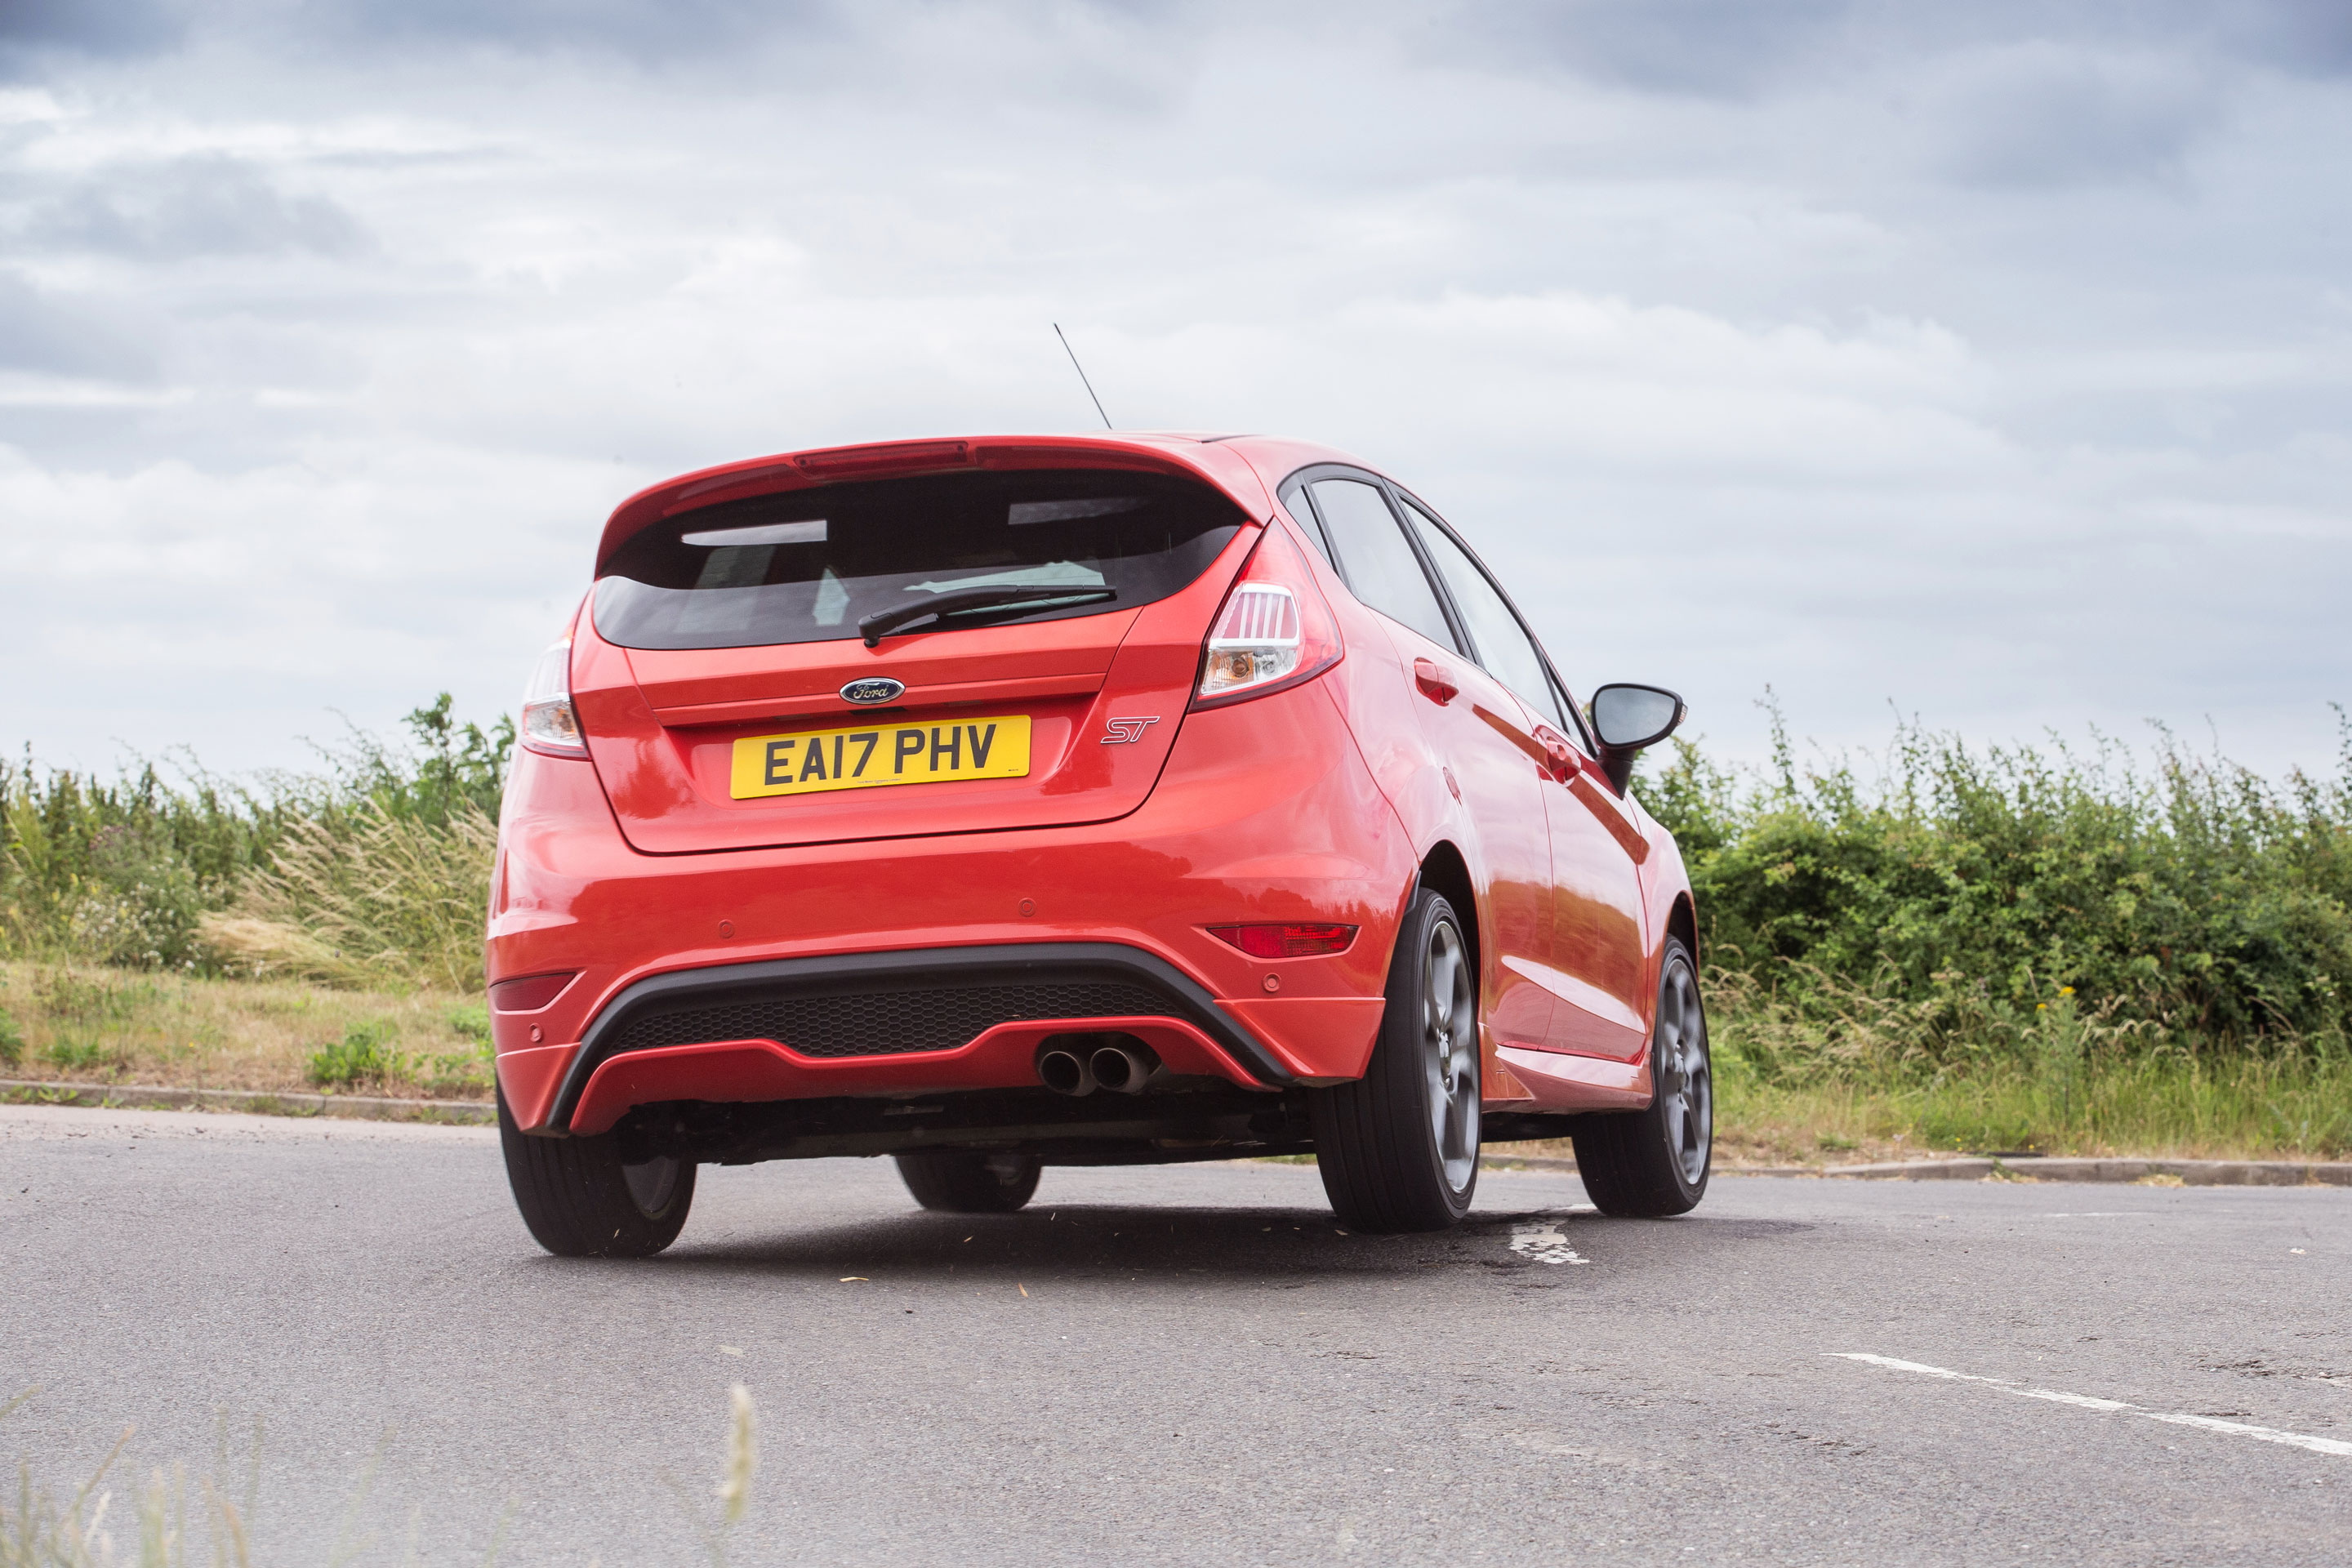 Ford Fiesta ST Mk7 review (2013-2017) – ride and handling